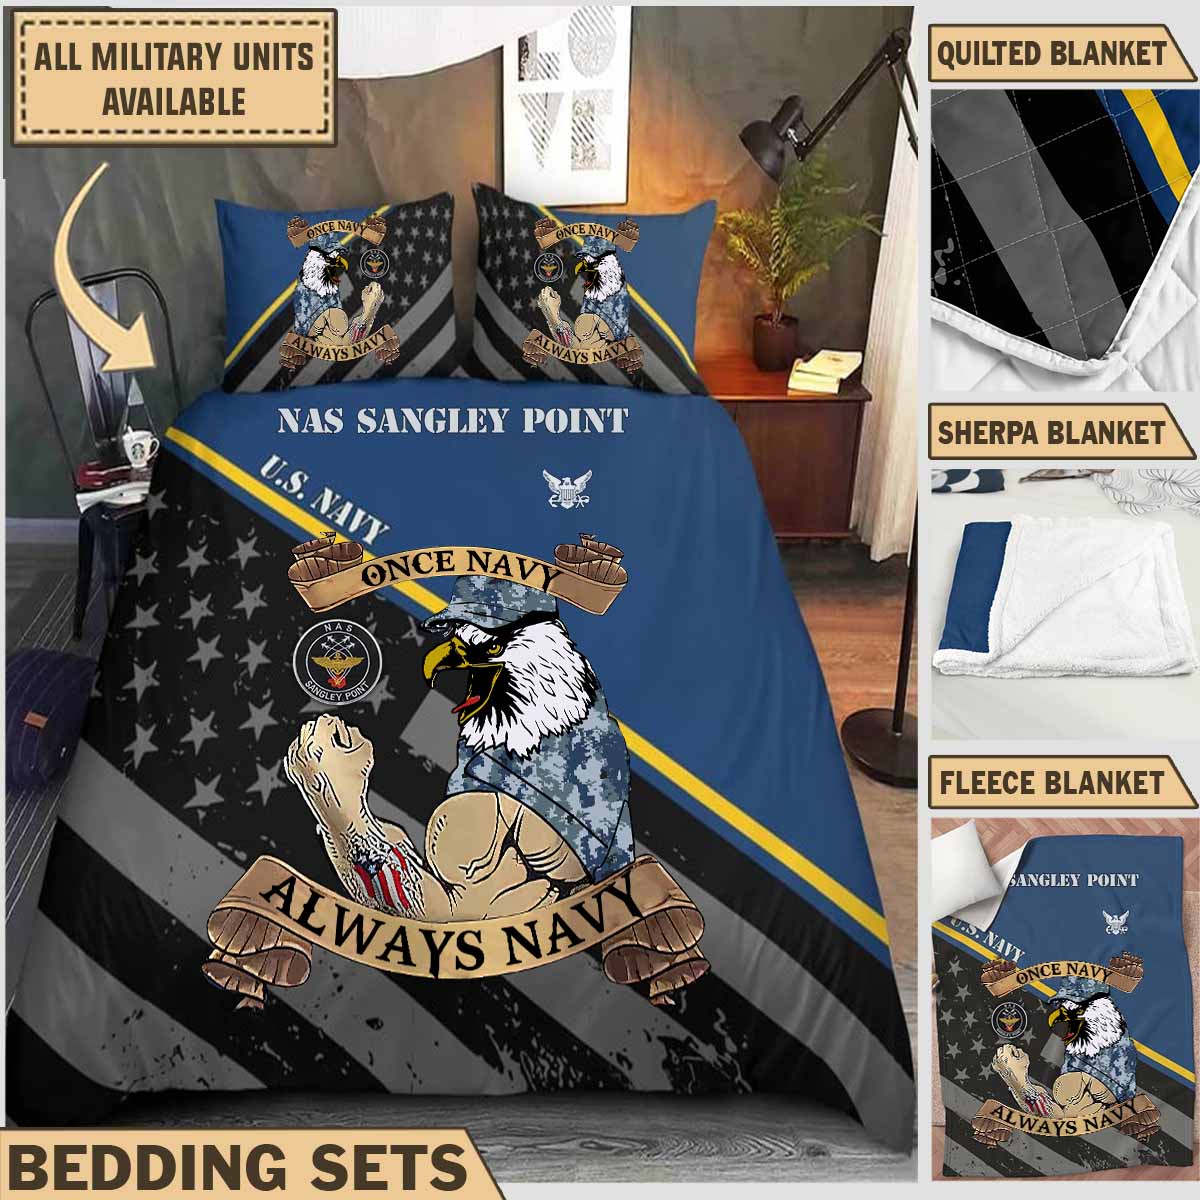 nas naval air station sangley pointbedding collection o1gl4